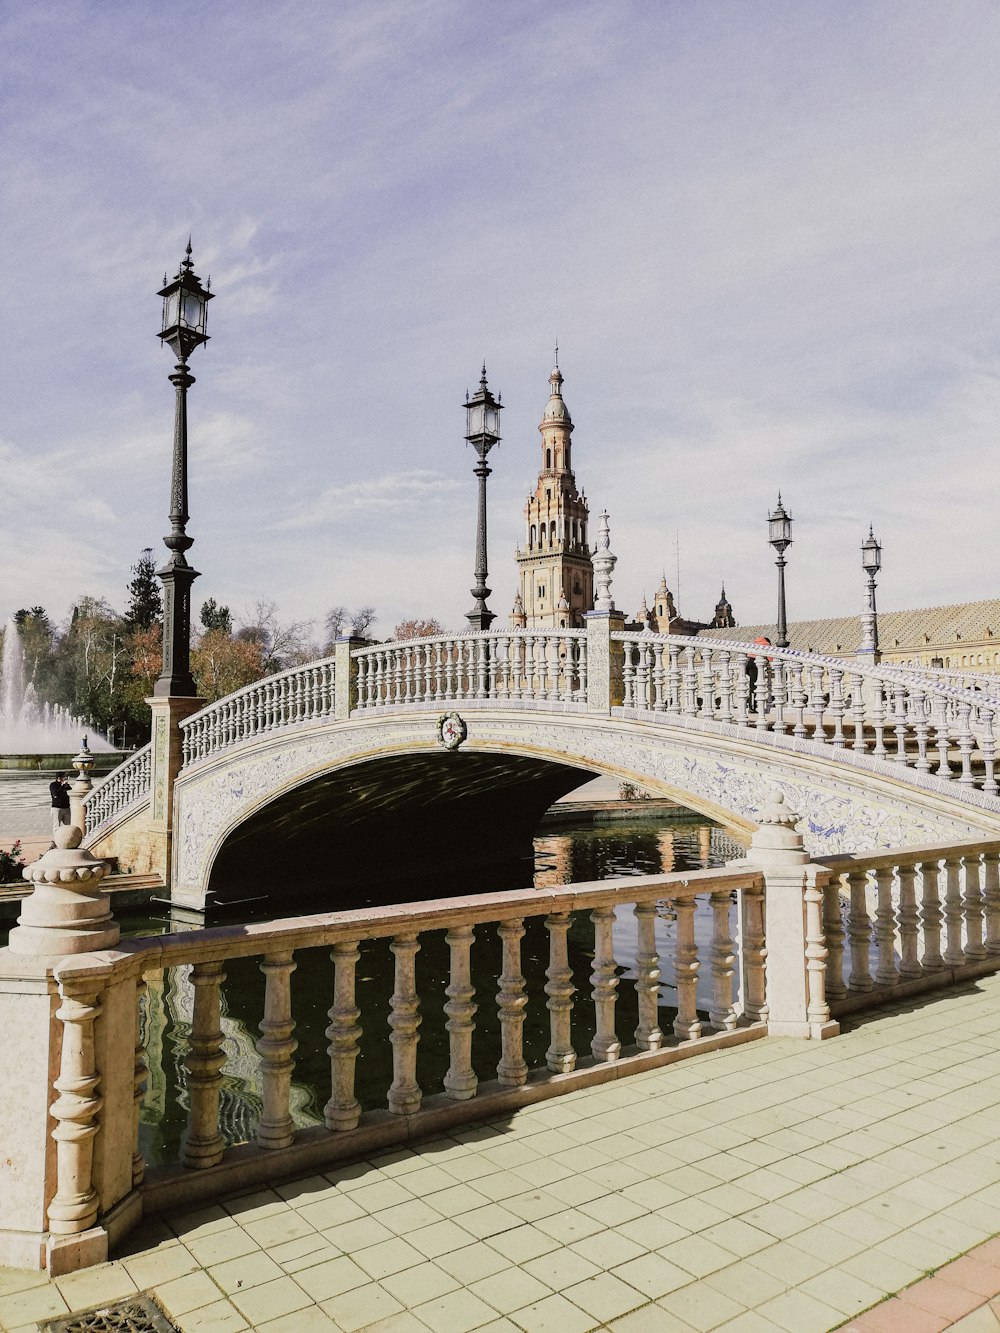 a bridge over a river with a clock tower in the background